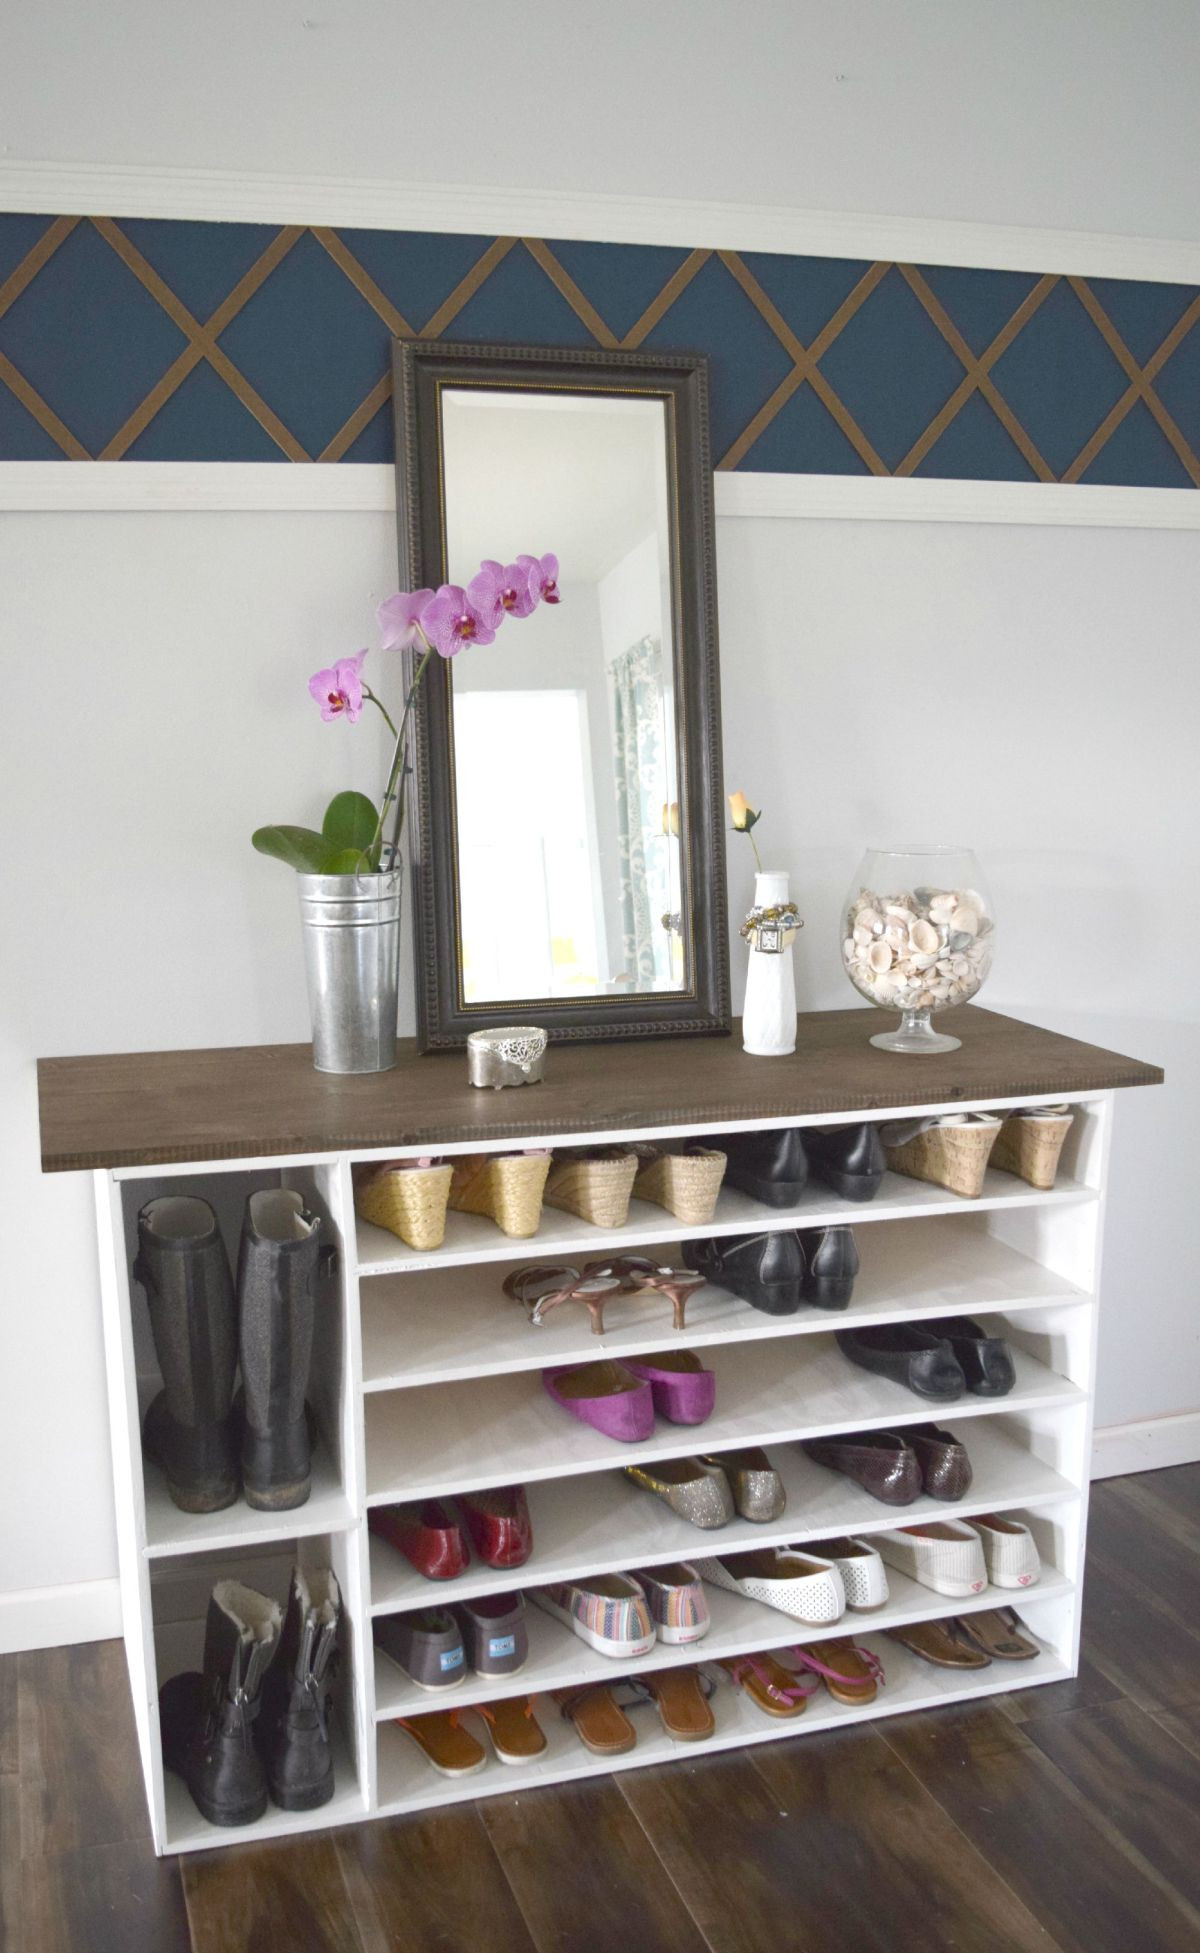 DIY Shoe Rack For Closet
 Stylish DIY Shoe Rack Perfect for Any Room